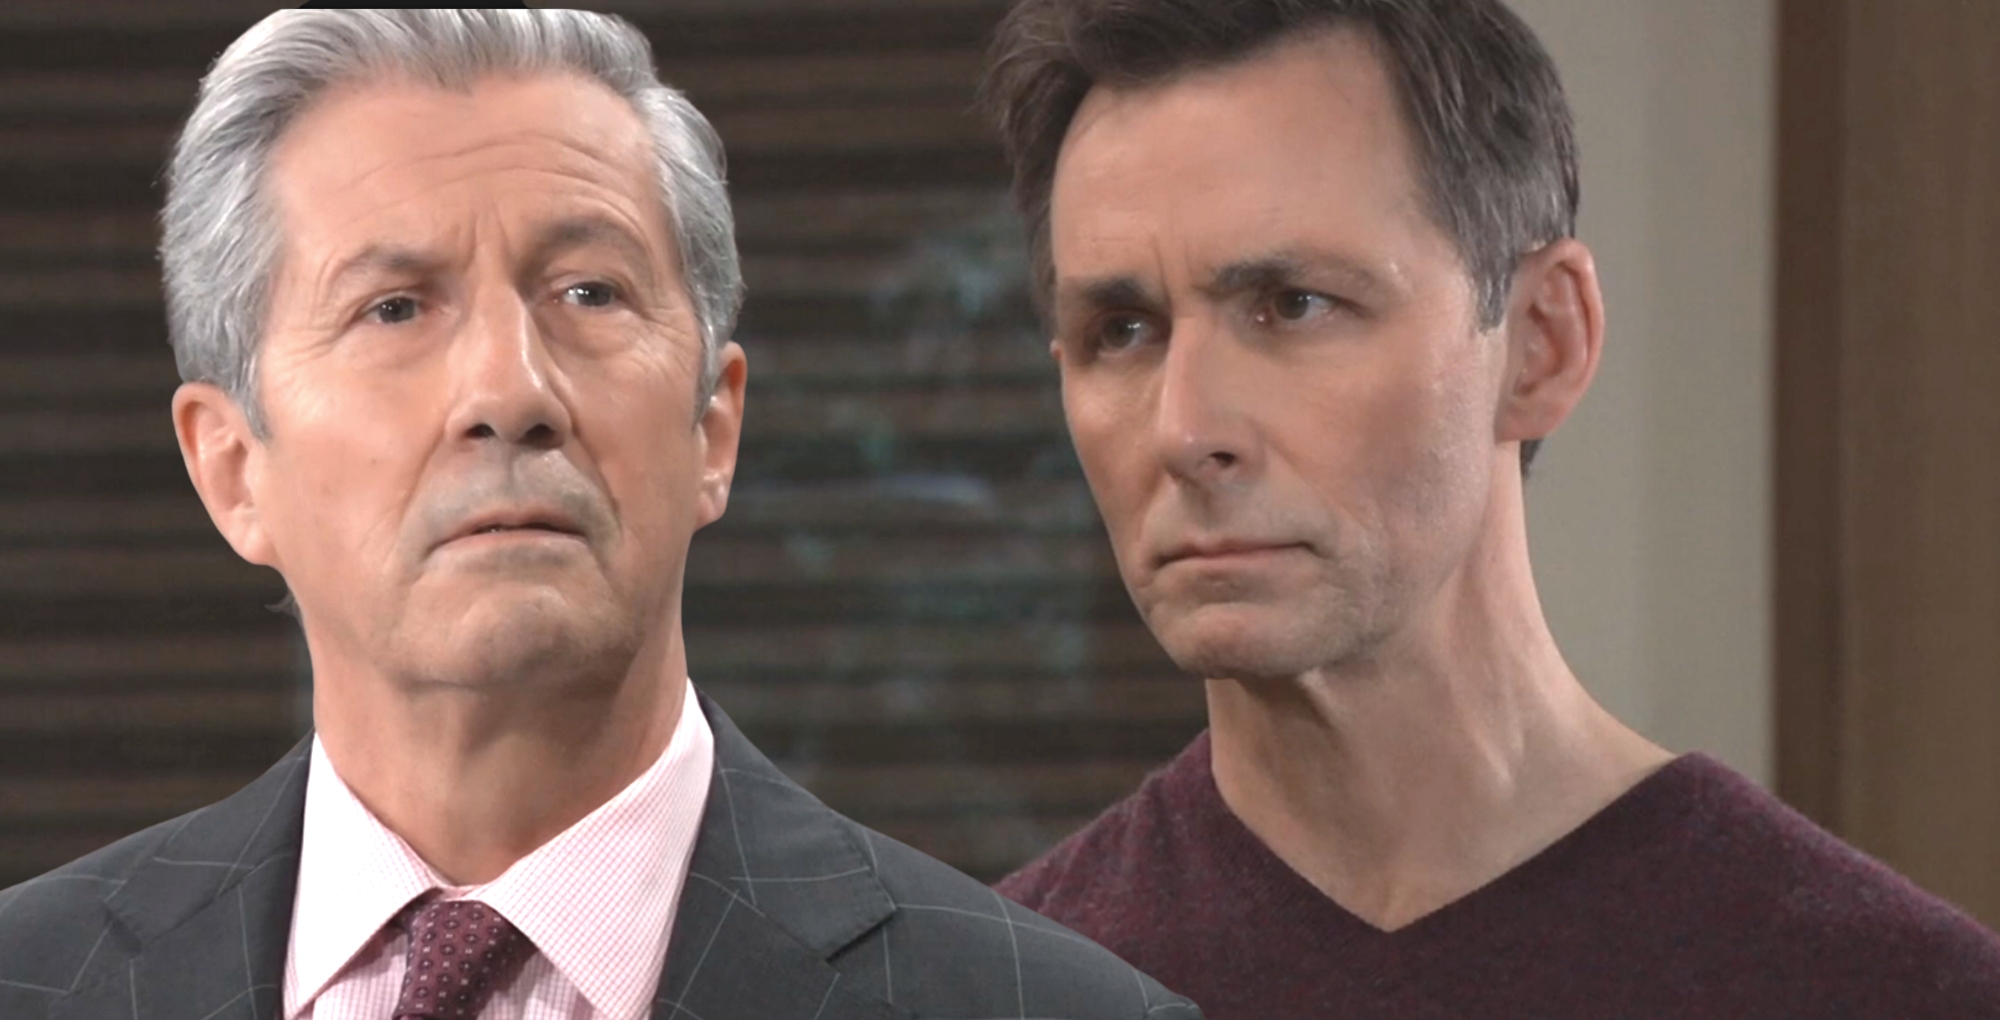 gh spoilers speculation about a showdown between victor cassadine and valentin cassadine